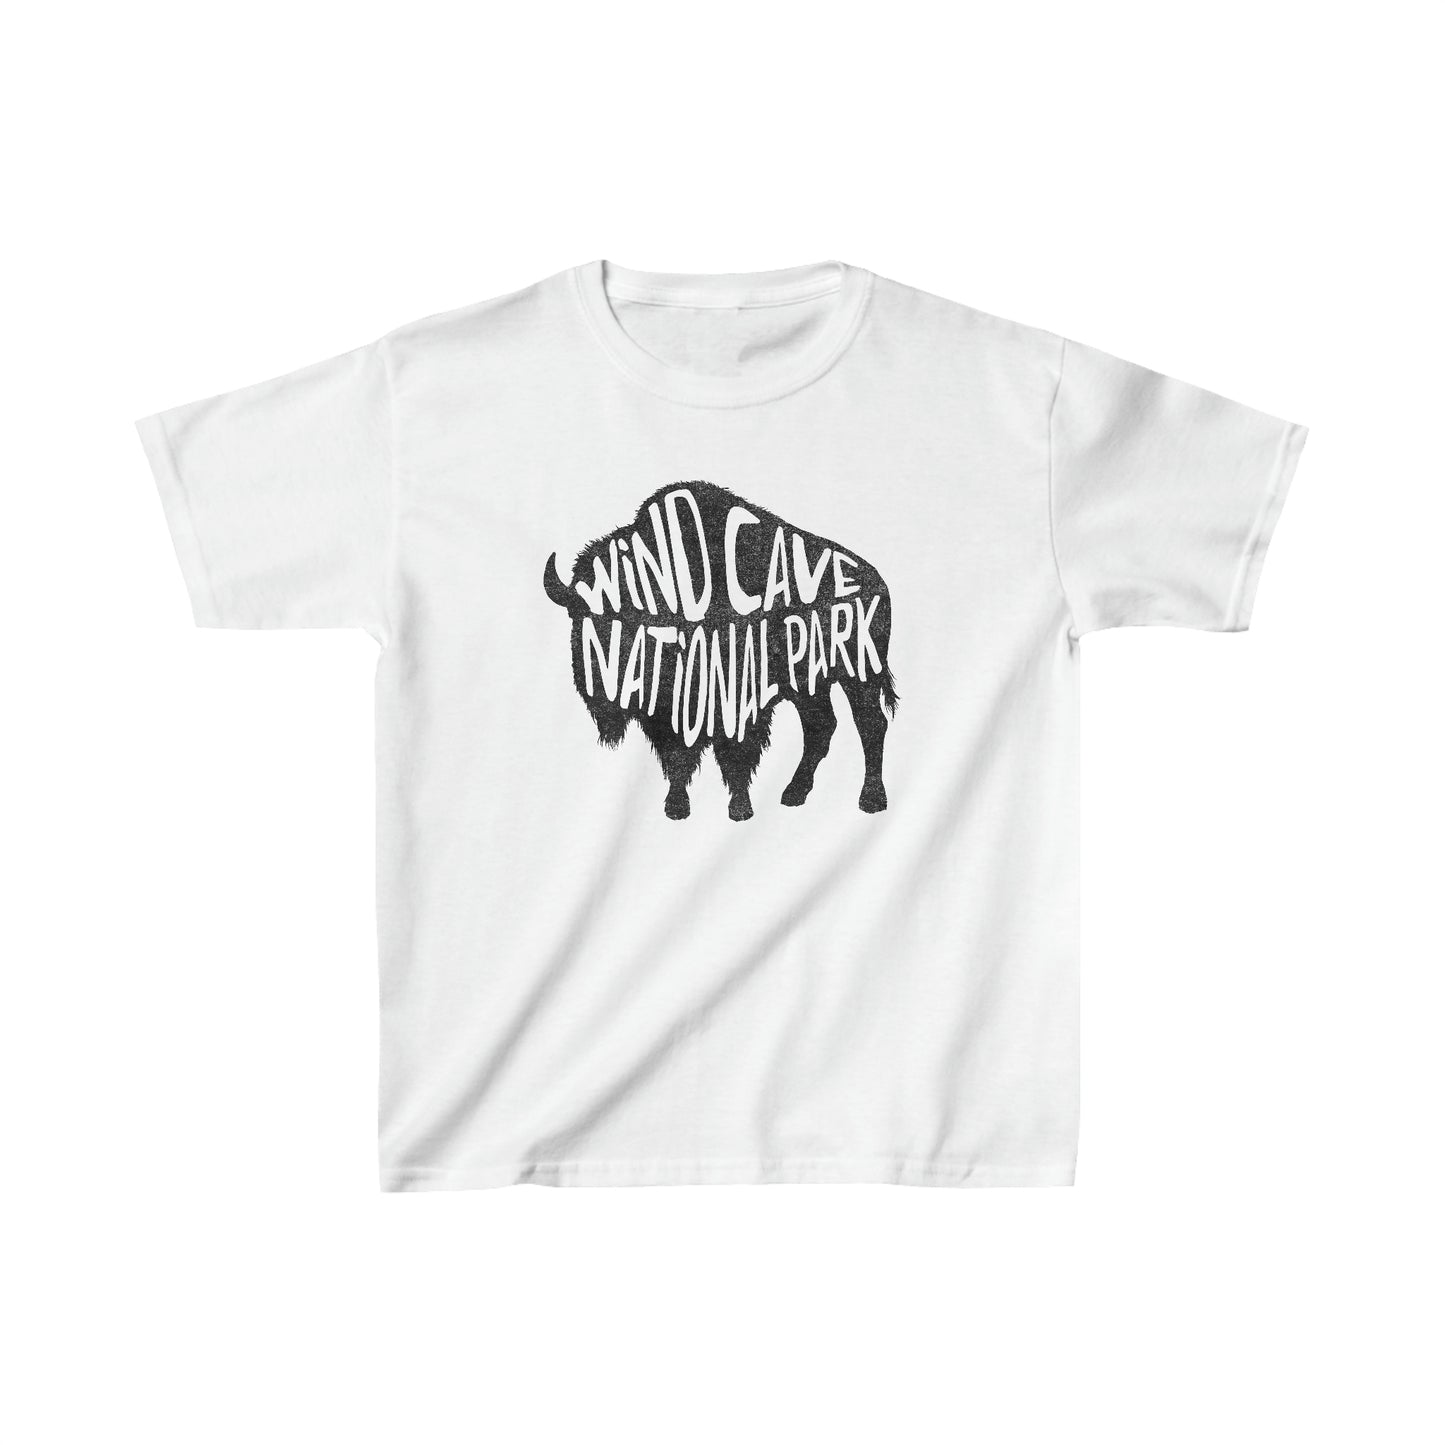 Wind Cave National Park Child T-Shirt - Bison Chunky Text